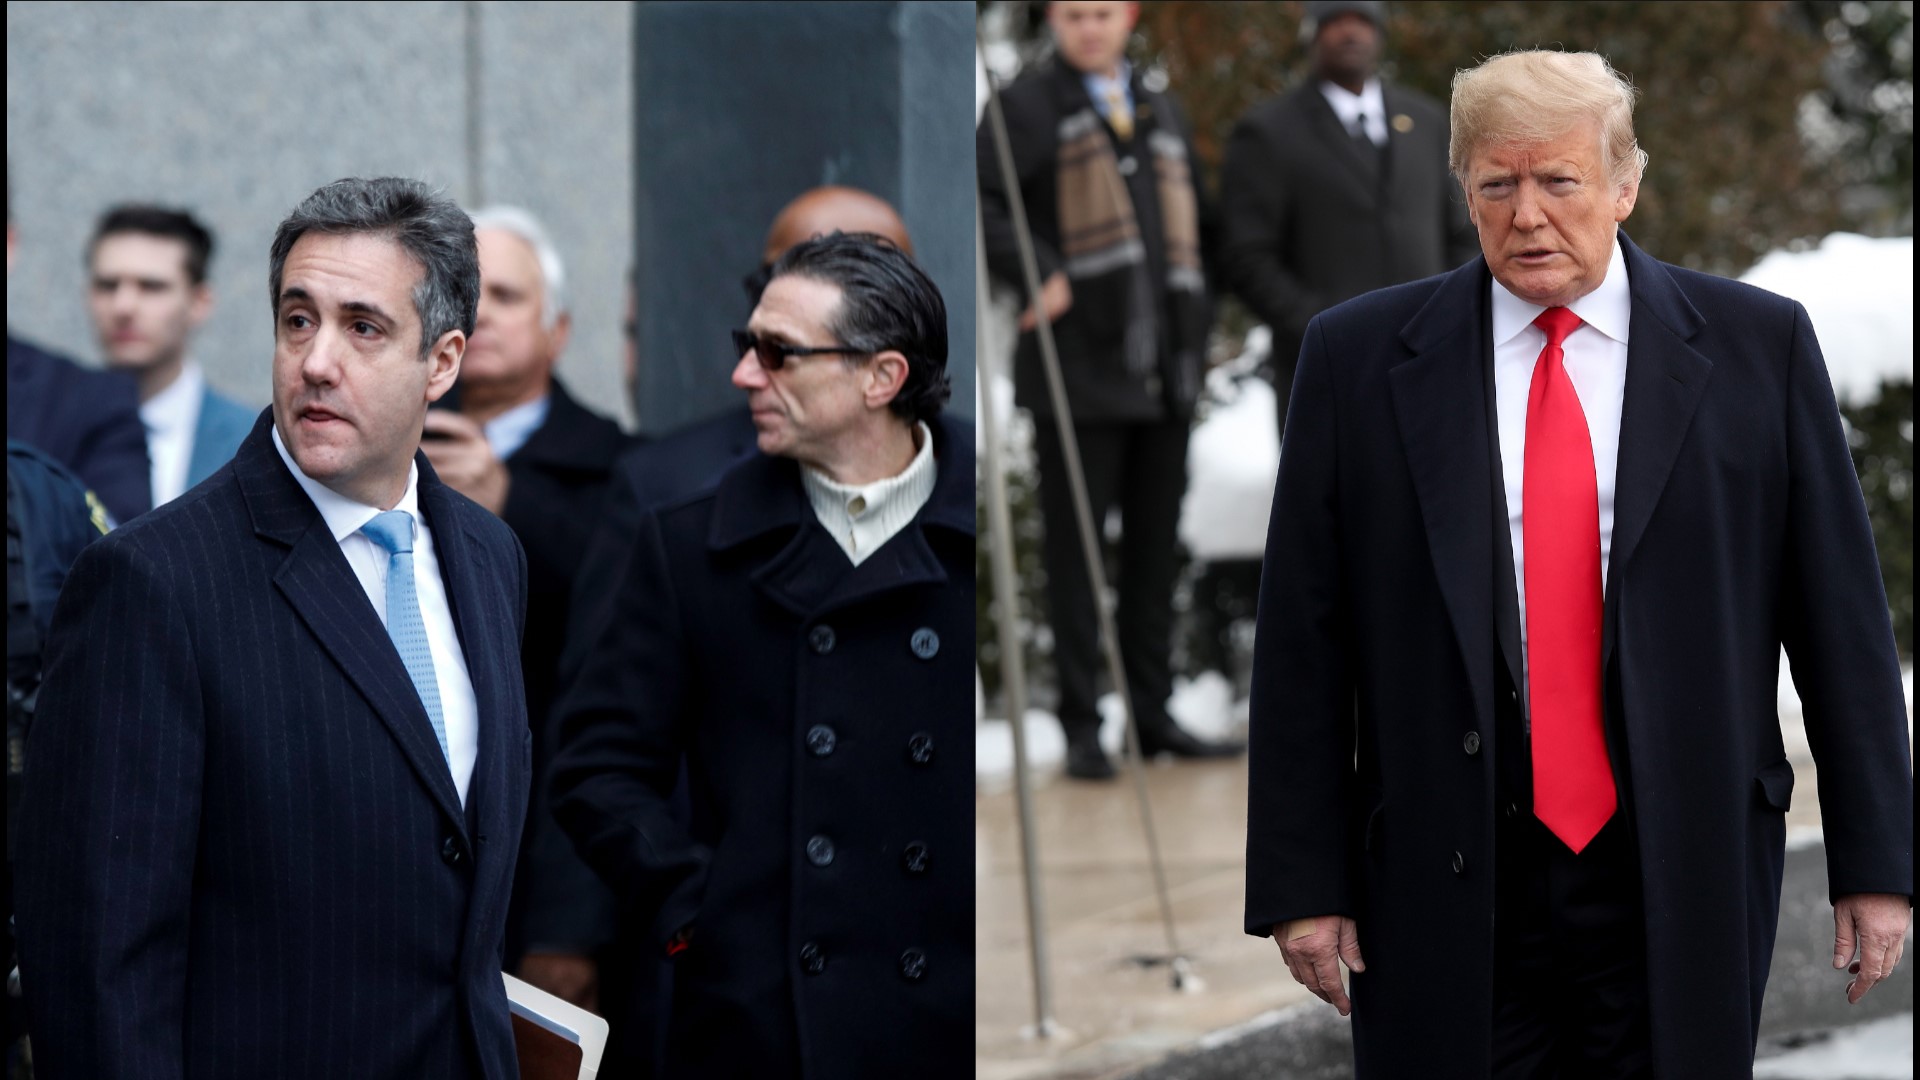 Michael Cohen, President Trump's former attorney, is set to be released from prison early over concerns of the coronavirus. Veuer's Justin Kircher has the story.